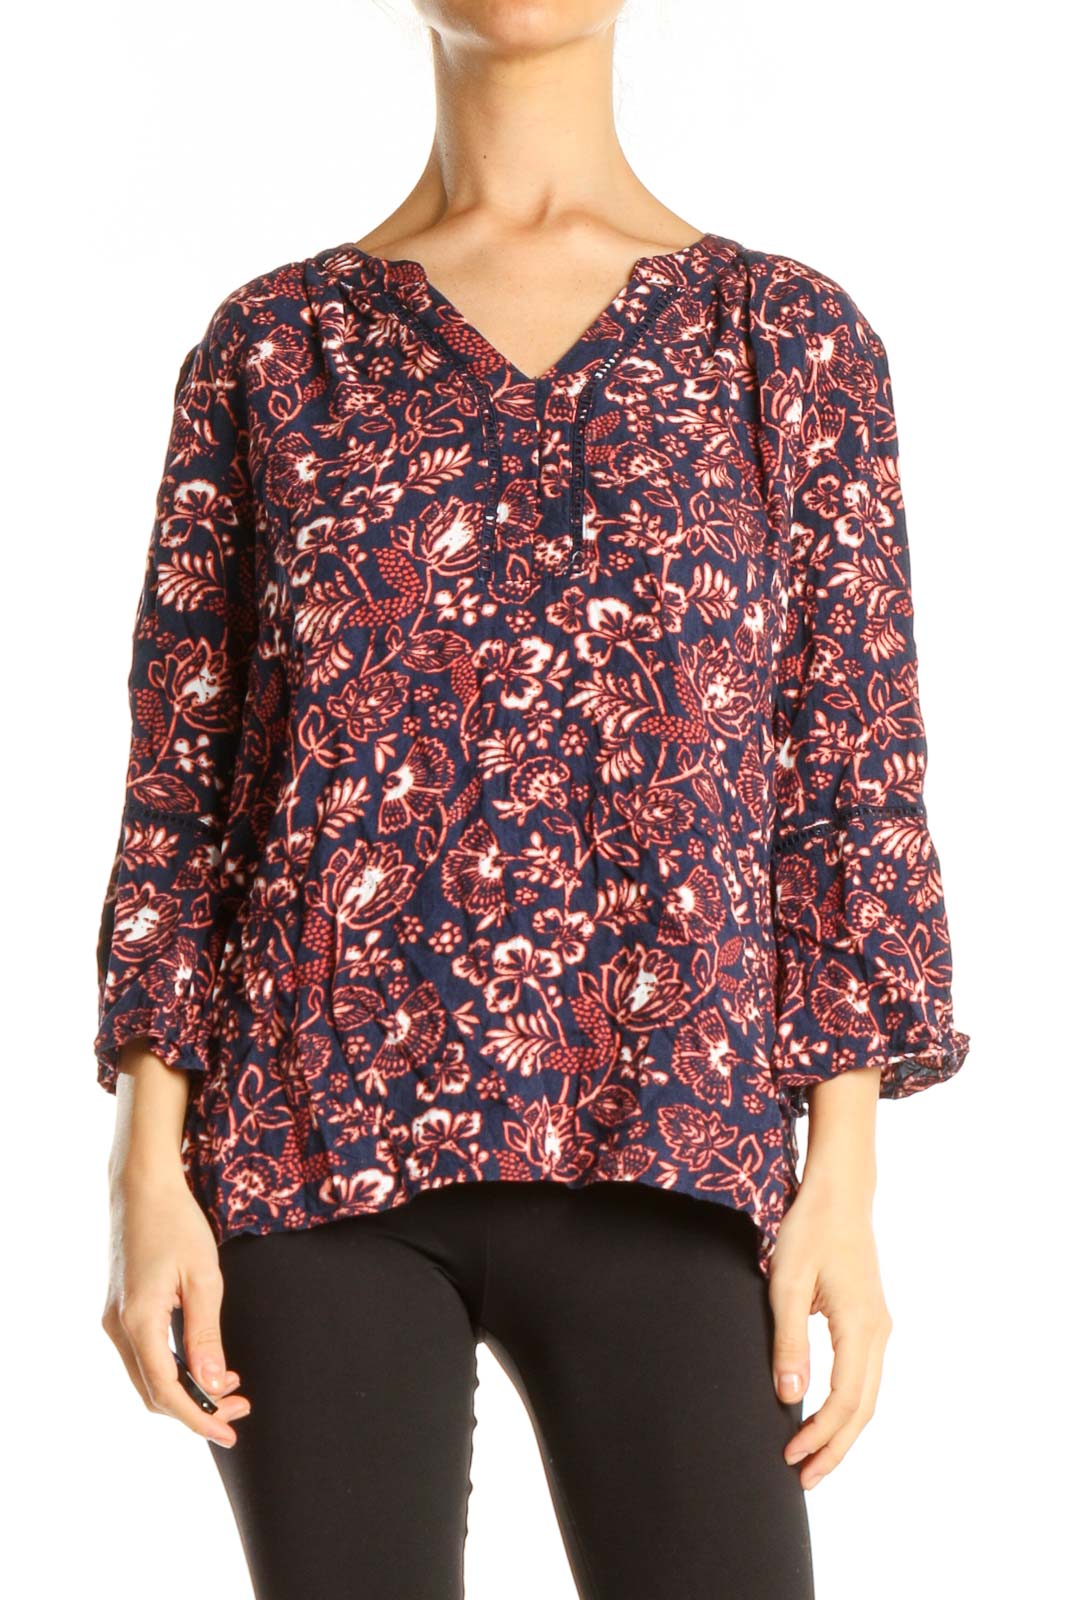 Red Blue Floral Print All Day Wear Top Front